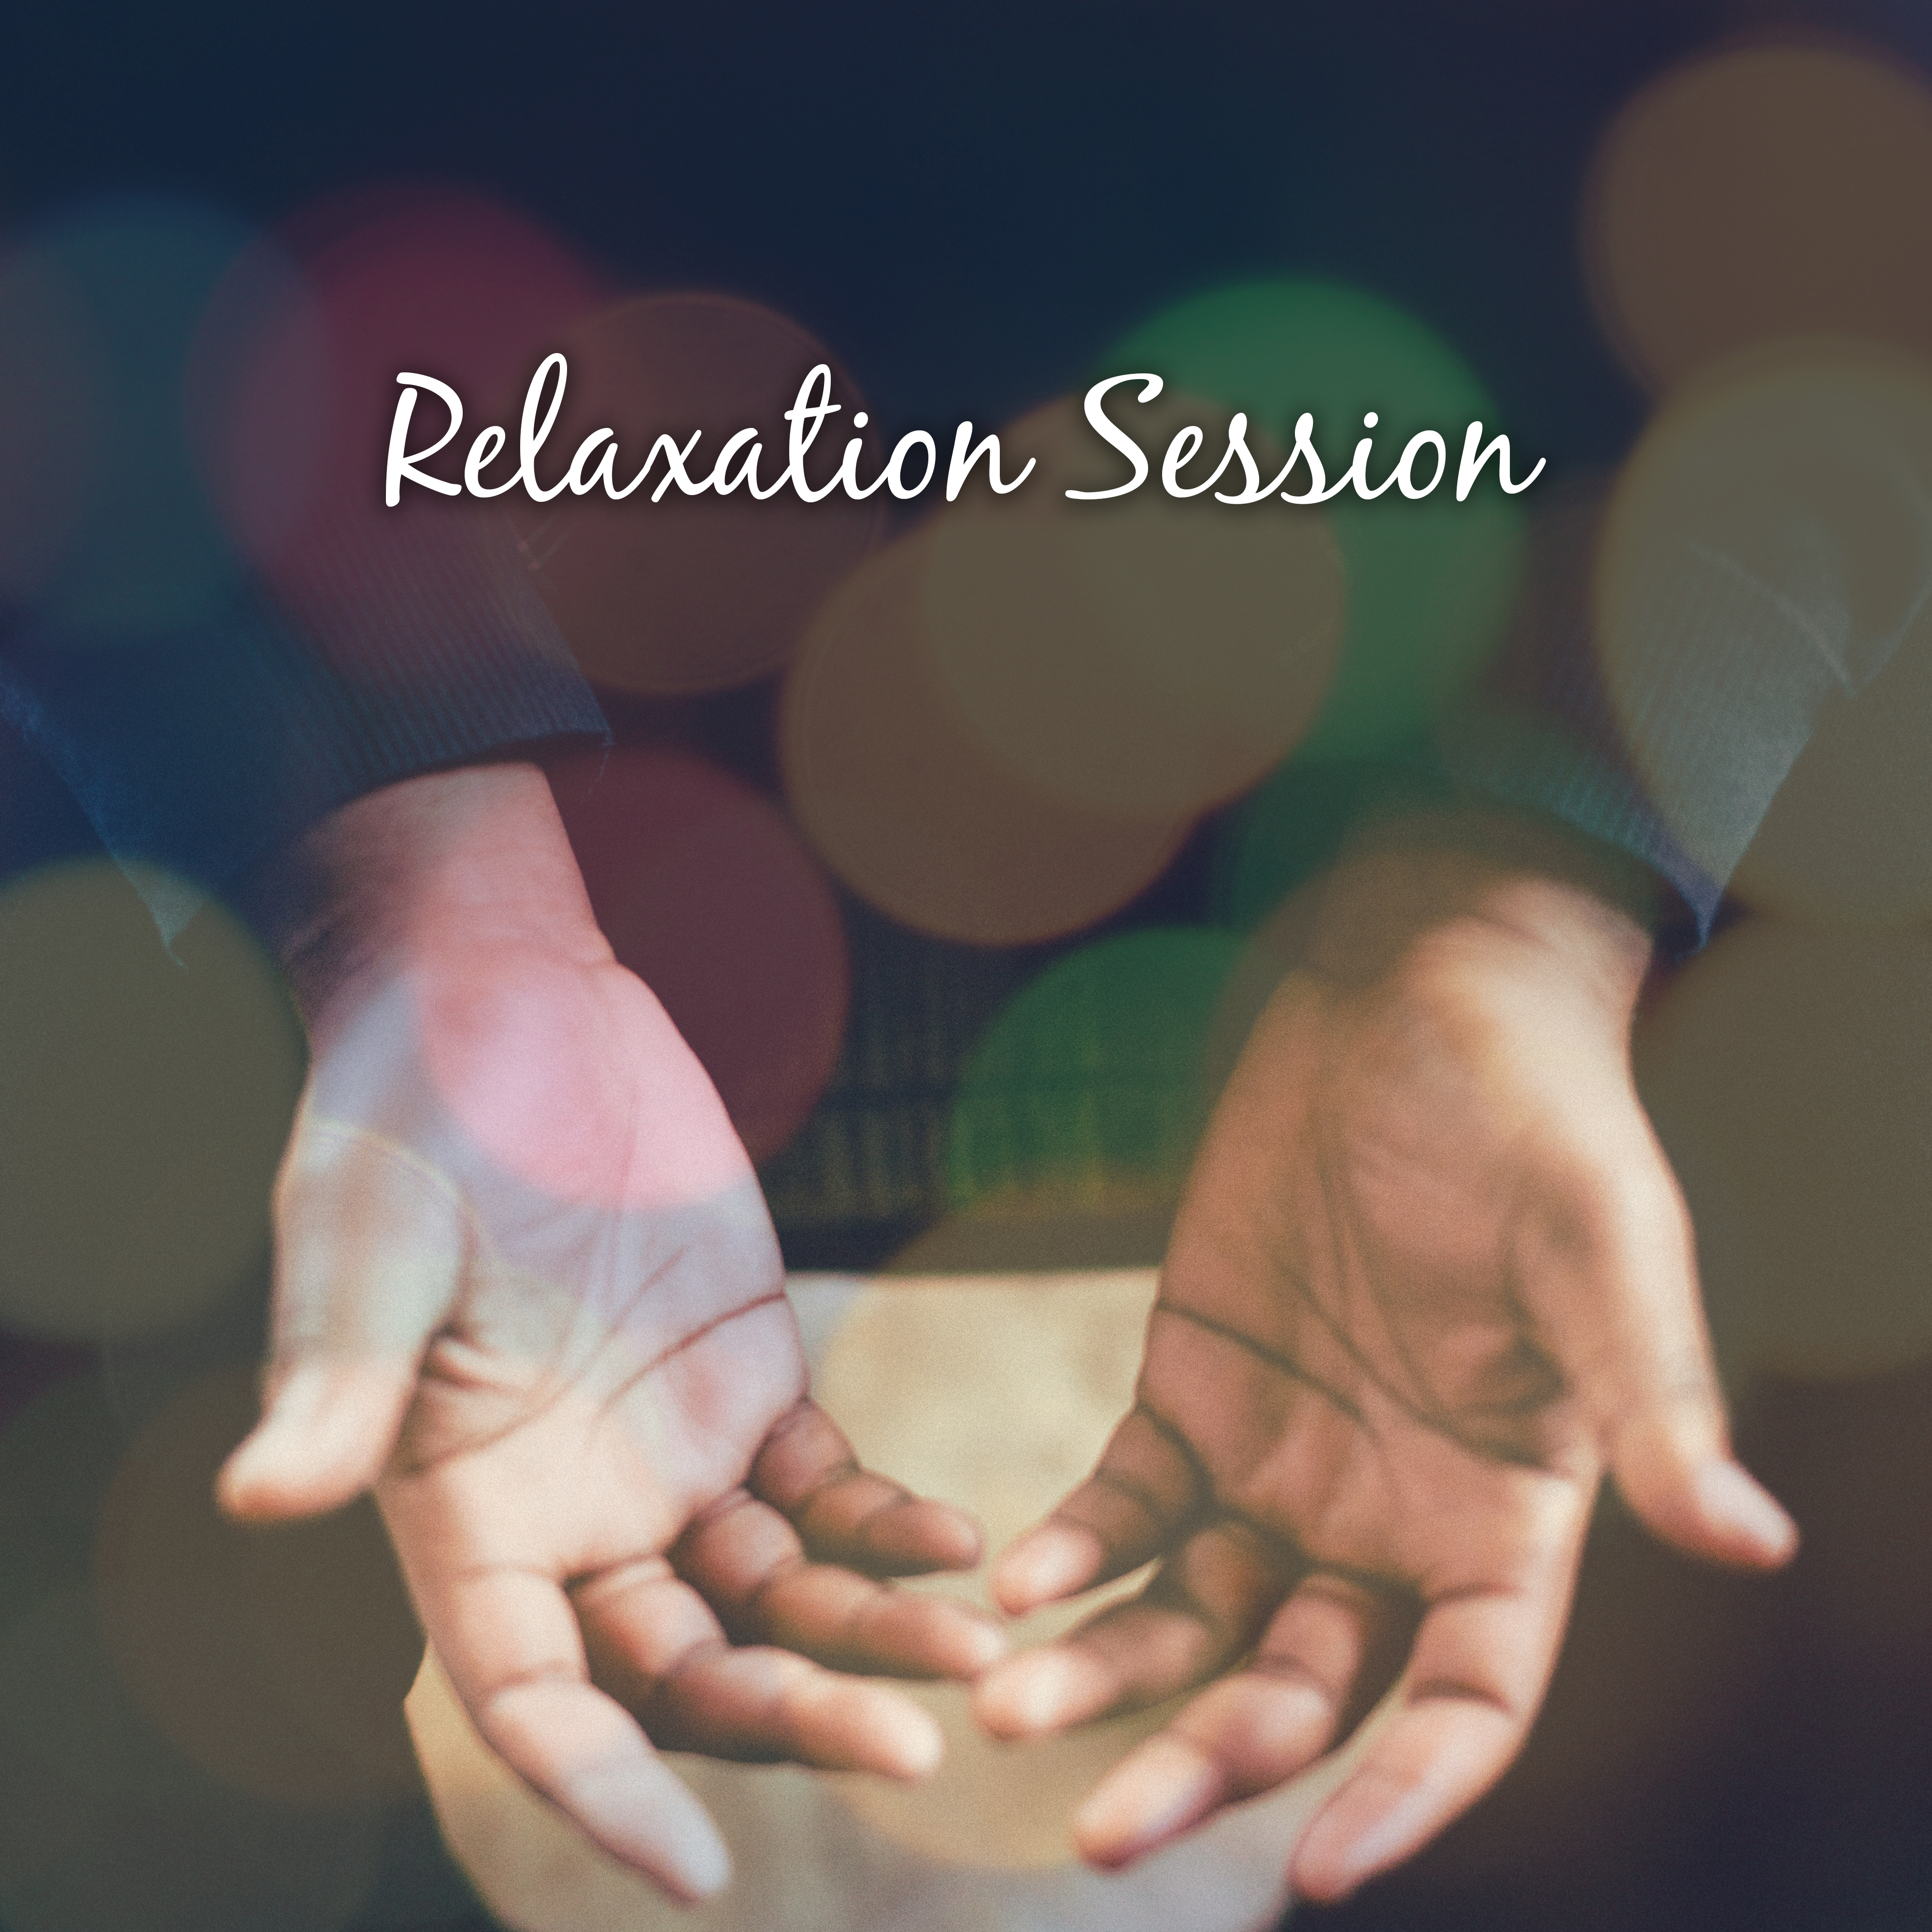 Relaxation Session – Calming Sounds of Nature, Deep Meditation, Total Body Relaxation, New Age 2017